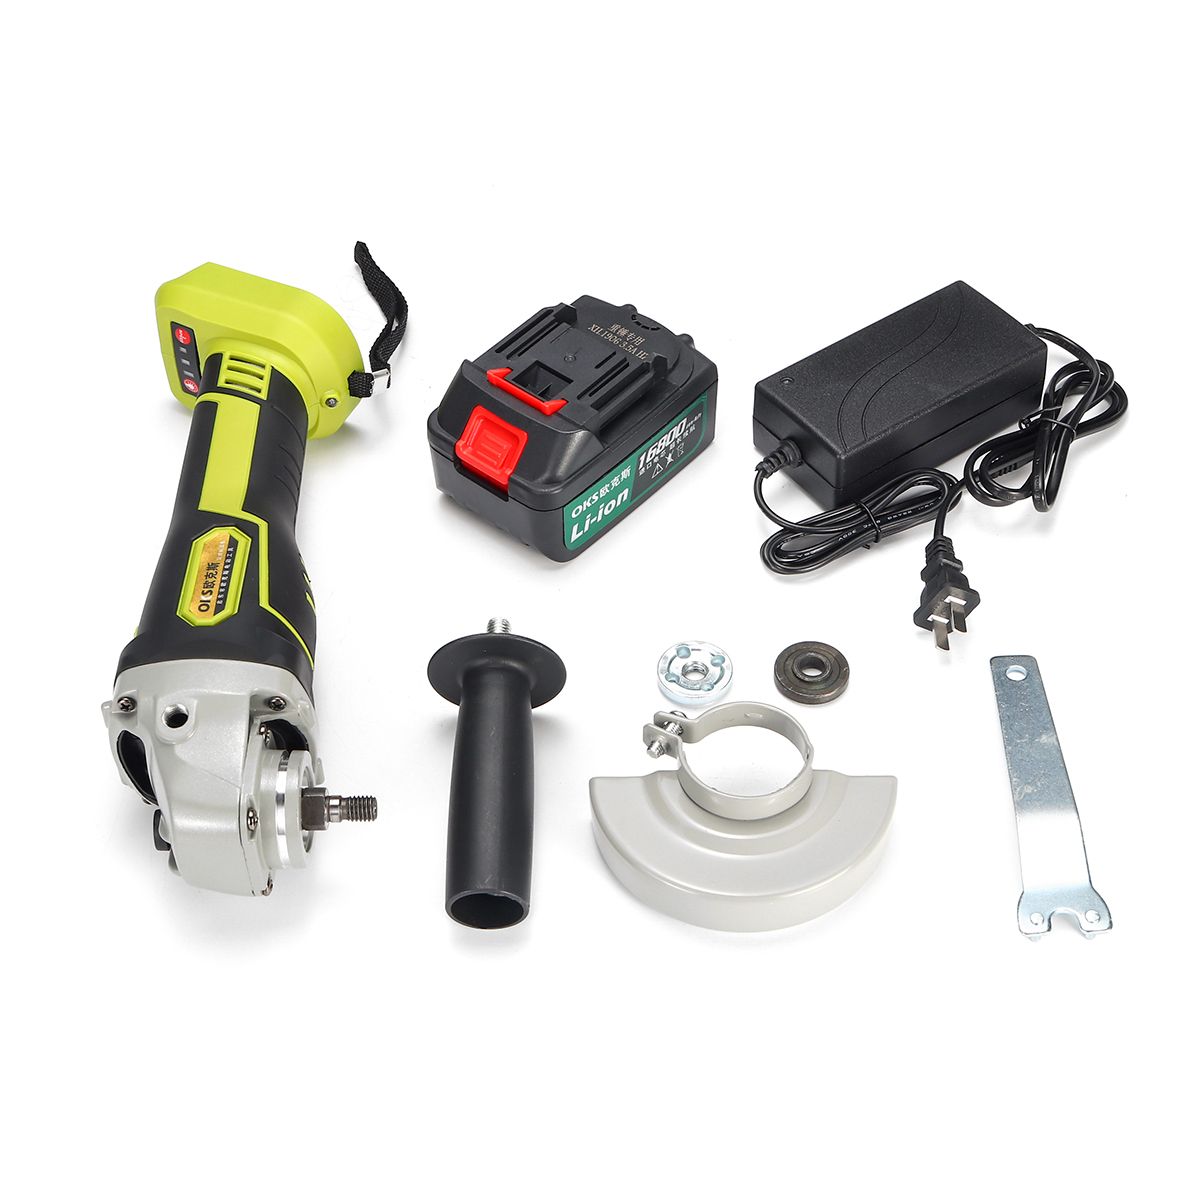 128vt-Angle-Grinder-Cordless-Brushless-Angle-Grinding-Cutting-Machine-Kit-Box-with-16800mAh-Battery-1576535